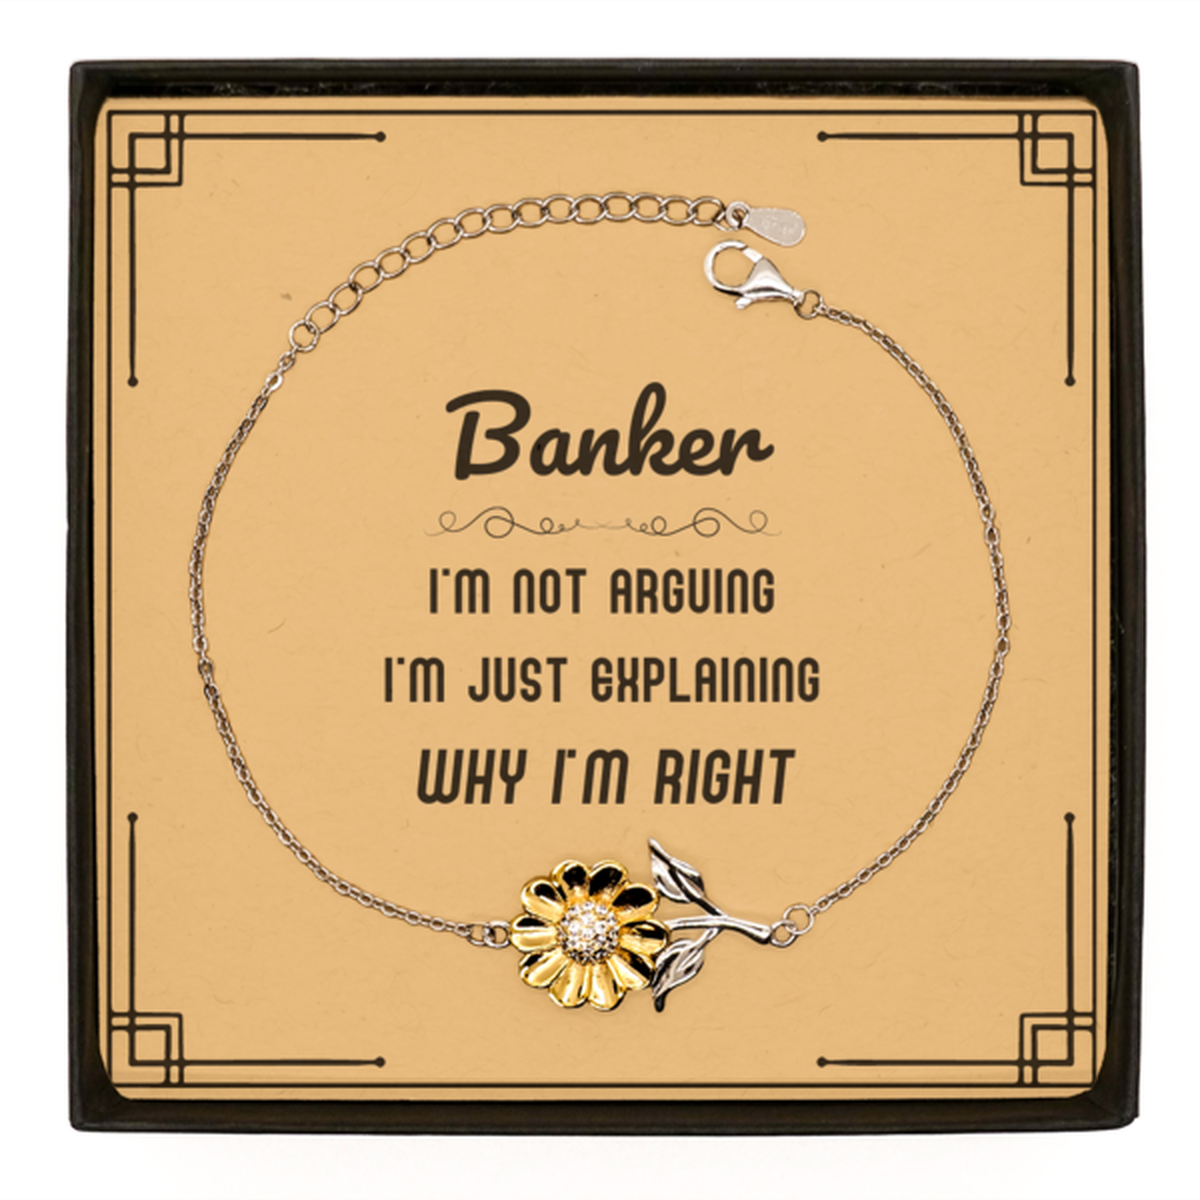 Banker I'm not Arguing. I'm Just Explaining Why I'm RIGHT Sunflower Bracelet, Funny Saying Quote Banker Gifts For Banker Message Card Graduation Birthday Christmas Gifts for Men Women Coworker